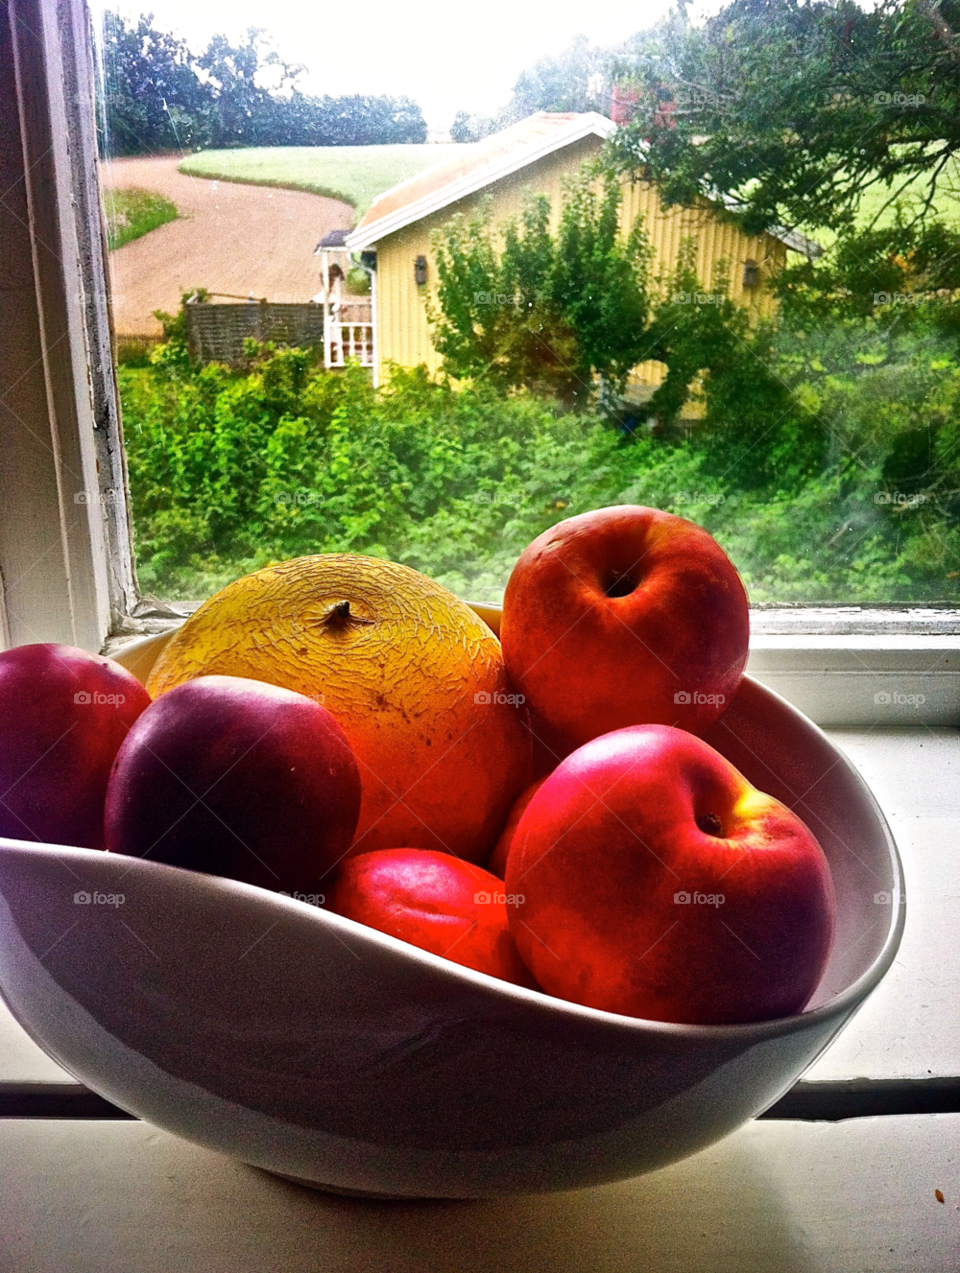 bowl fruits window cottage rural area summer season outside city of stockholm lgt41 skyttorp by lgt41